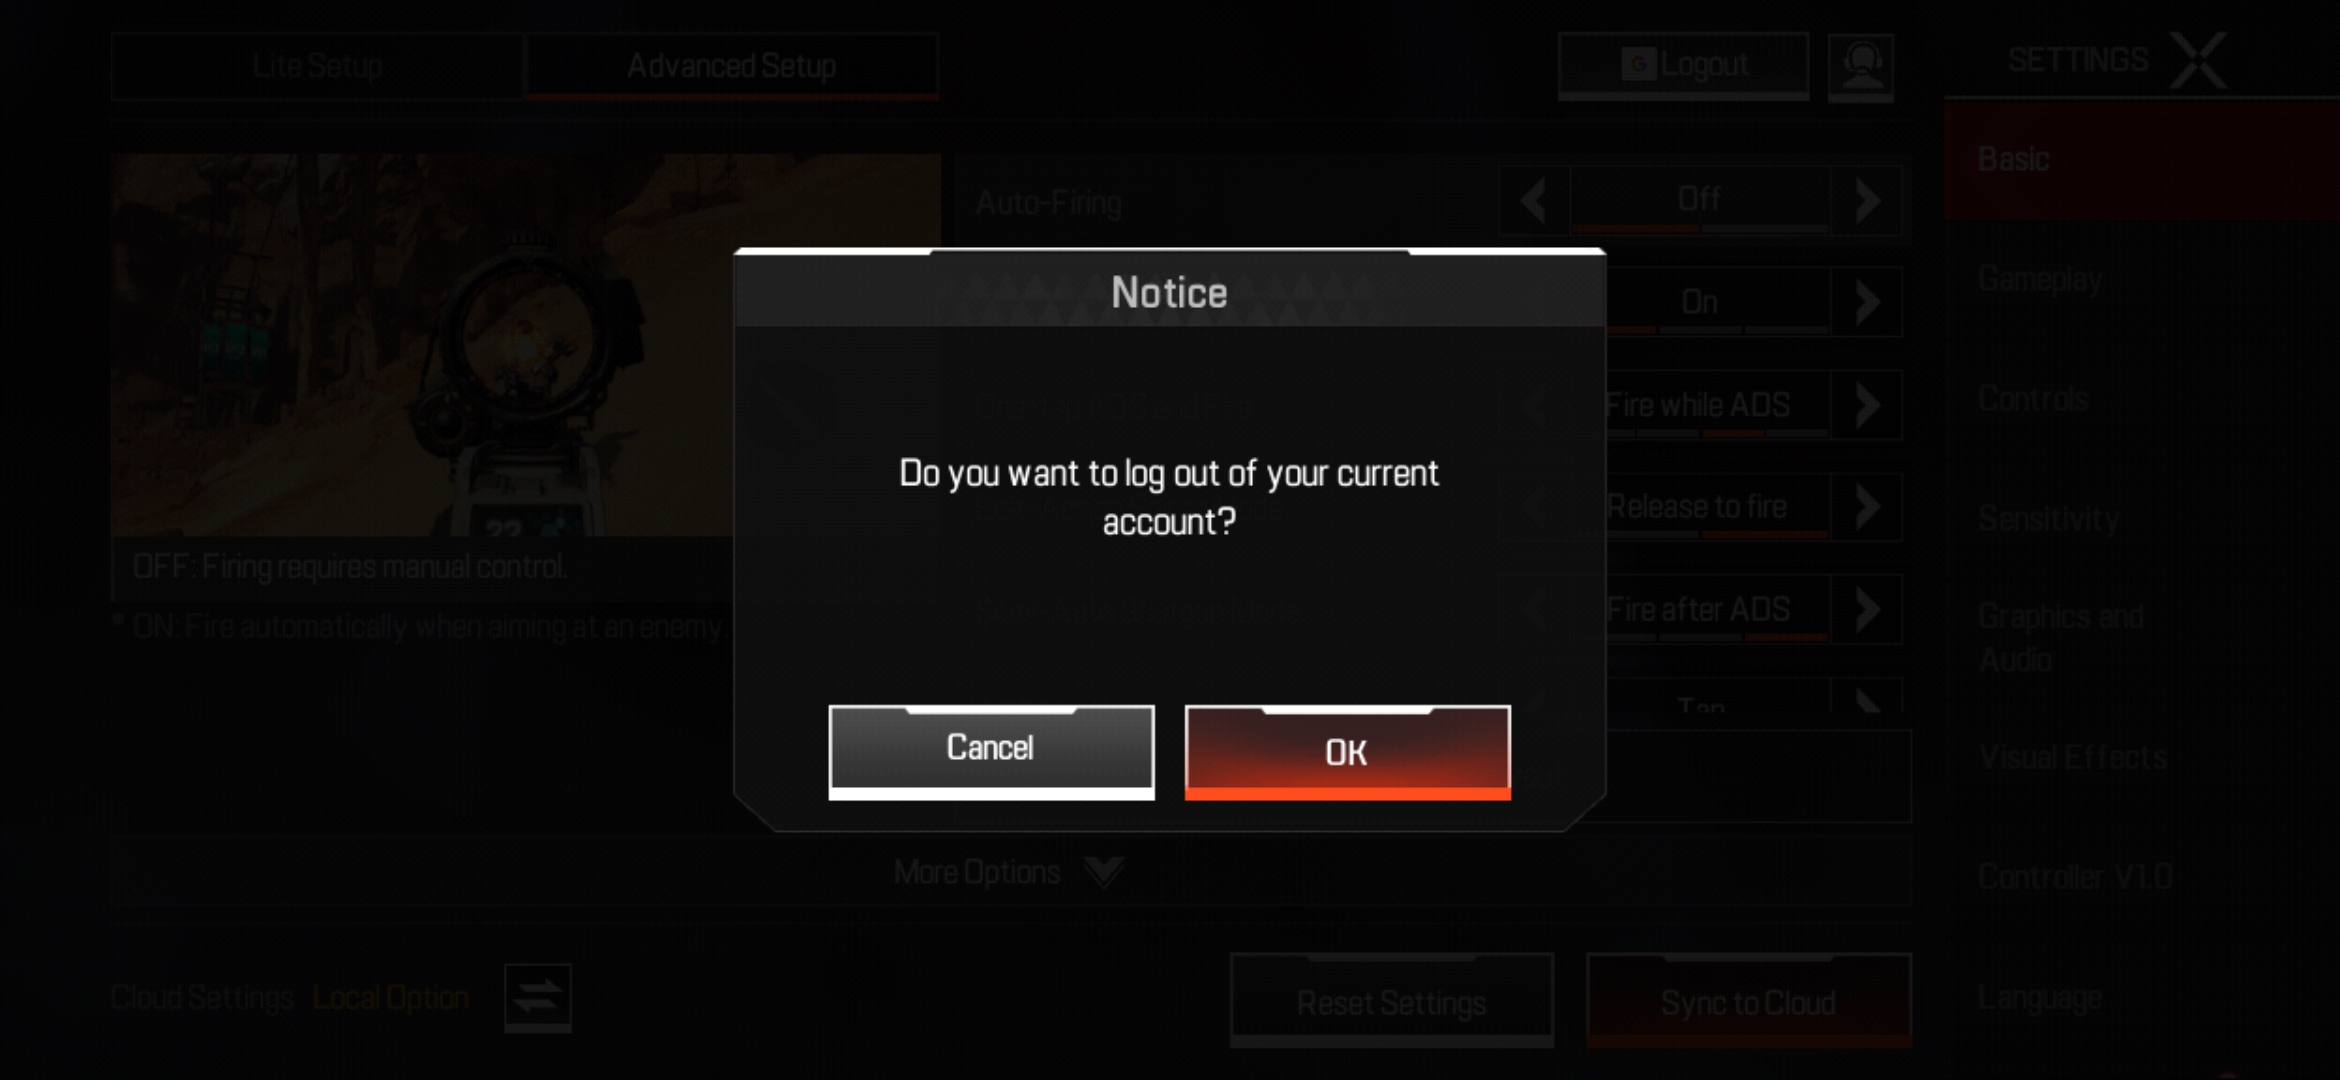 Apex Legends: How to Logout and Switch Accounts